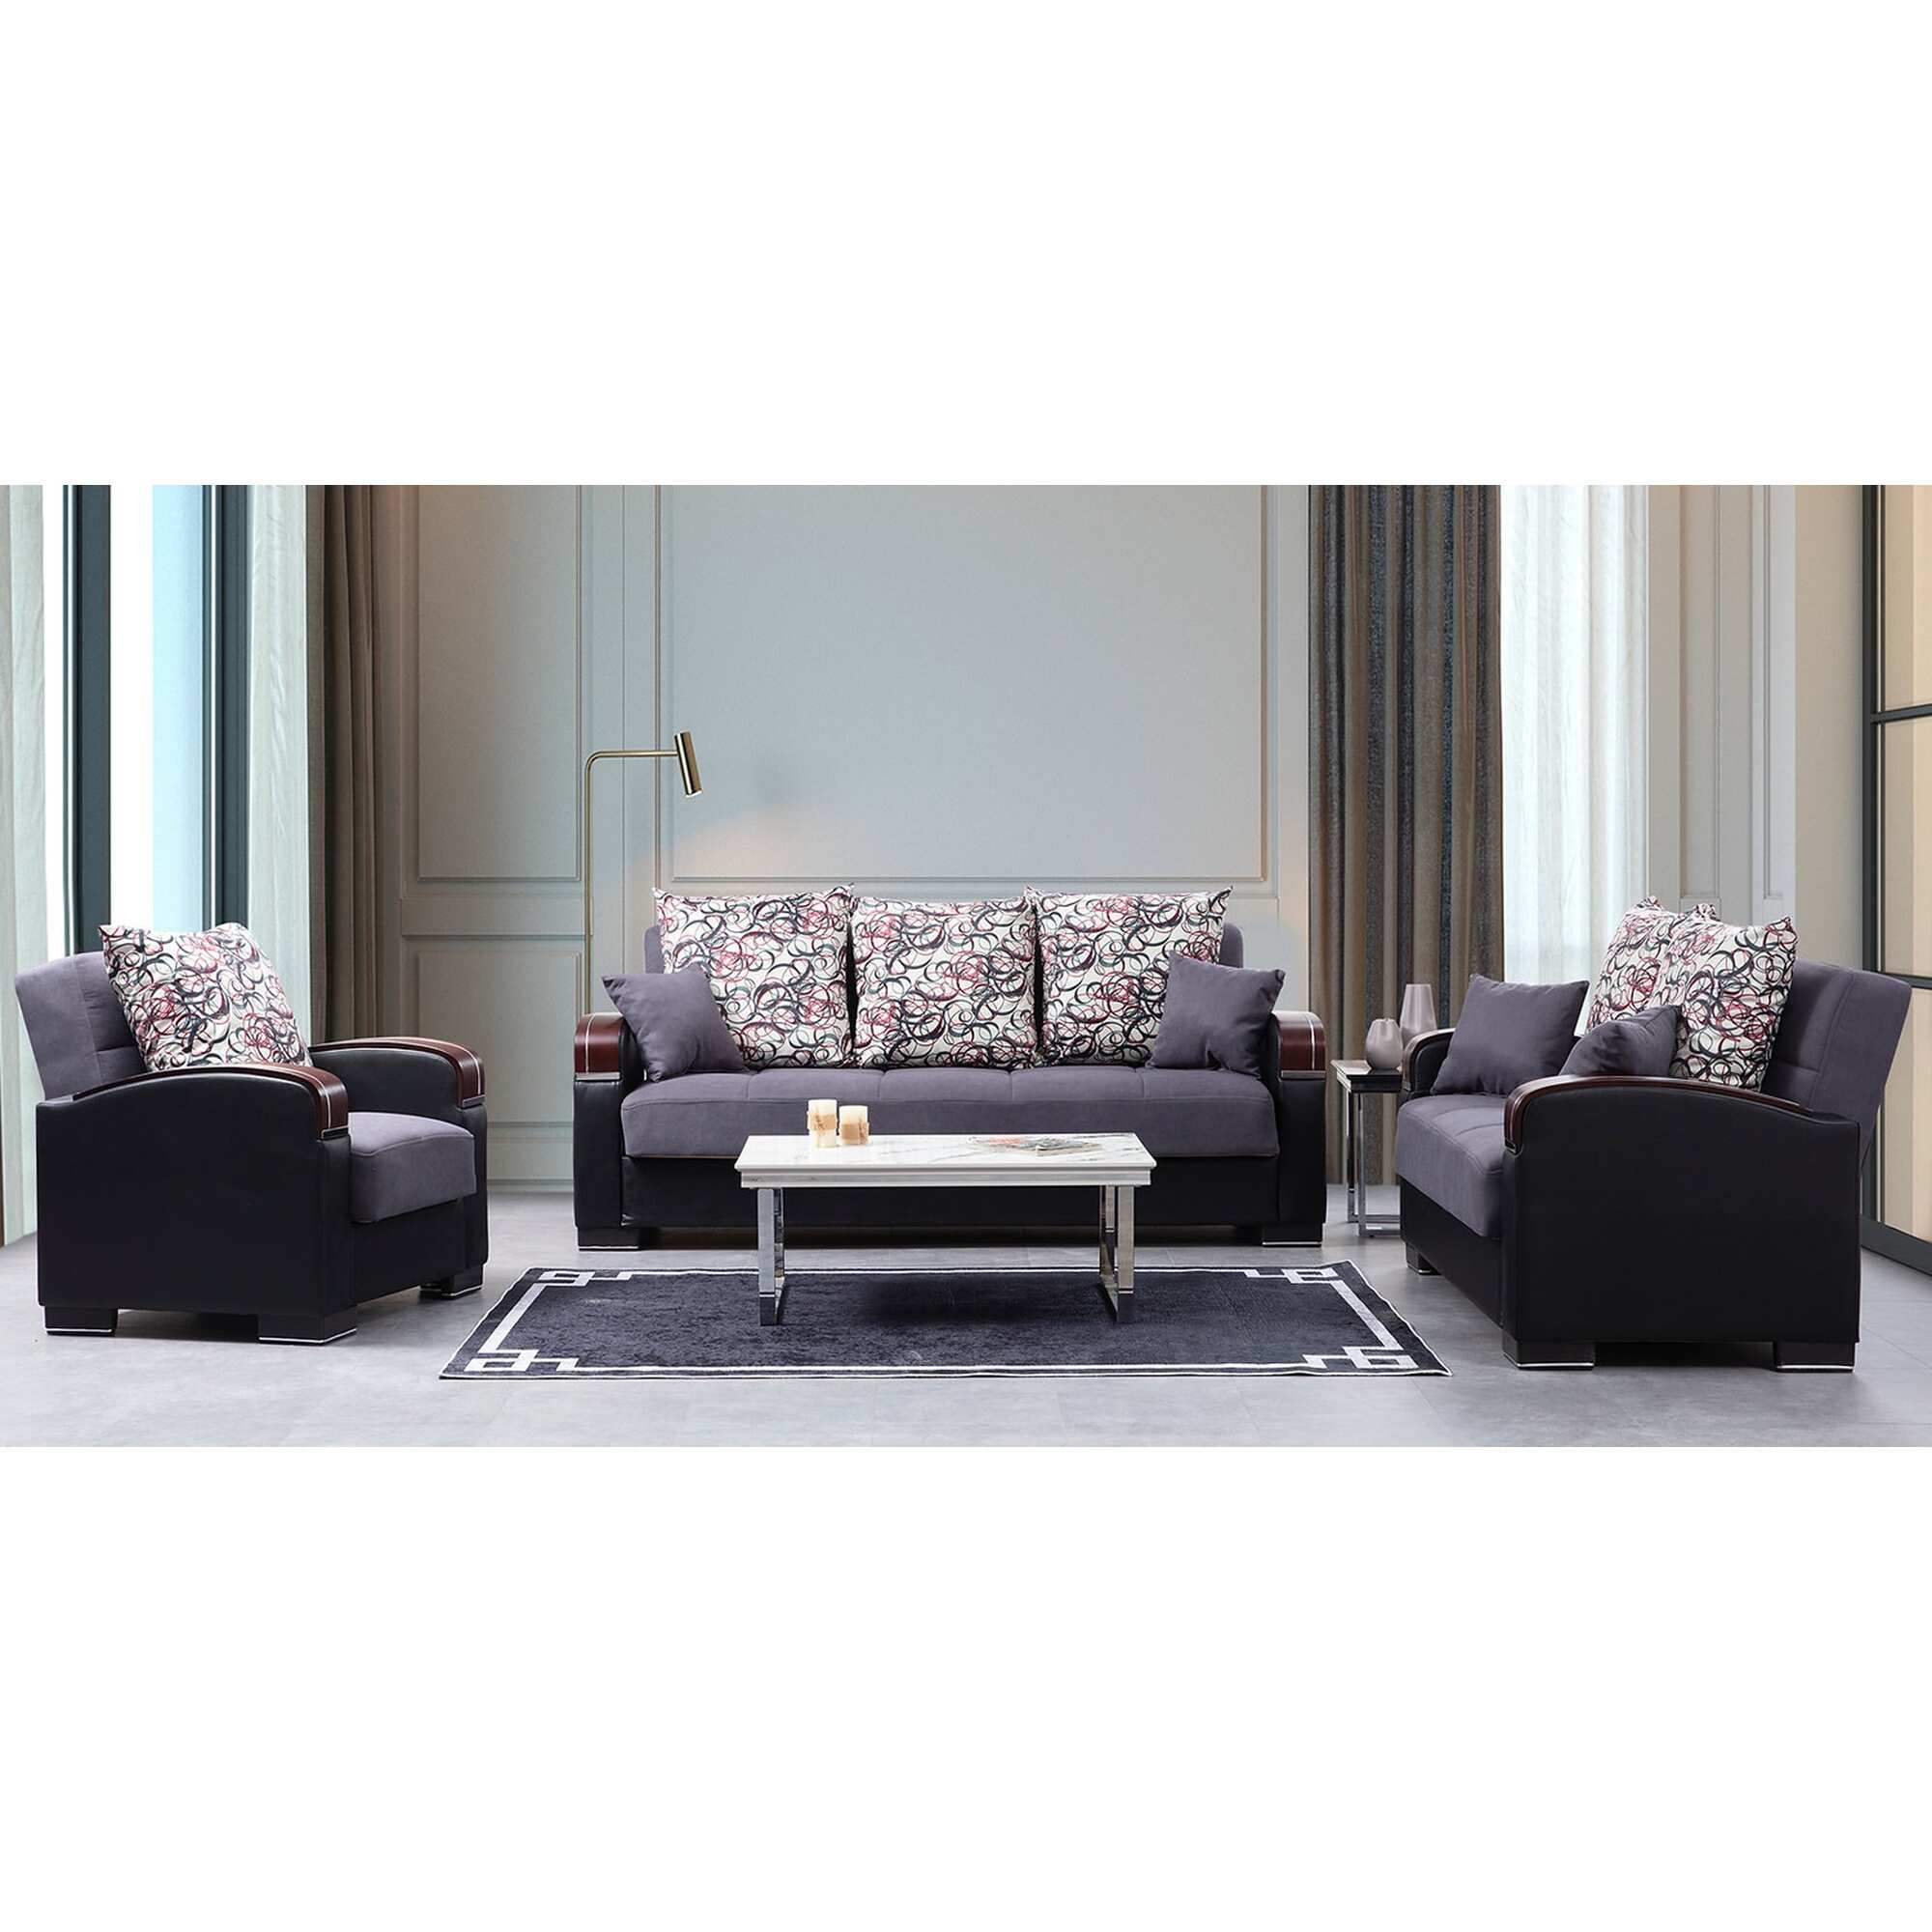 Tulsa Grey Fabric-Leather Upholstered Convertible Loveseat with Storage